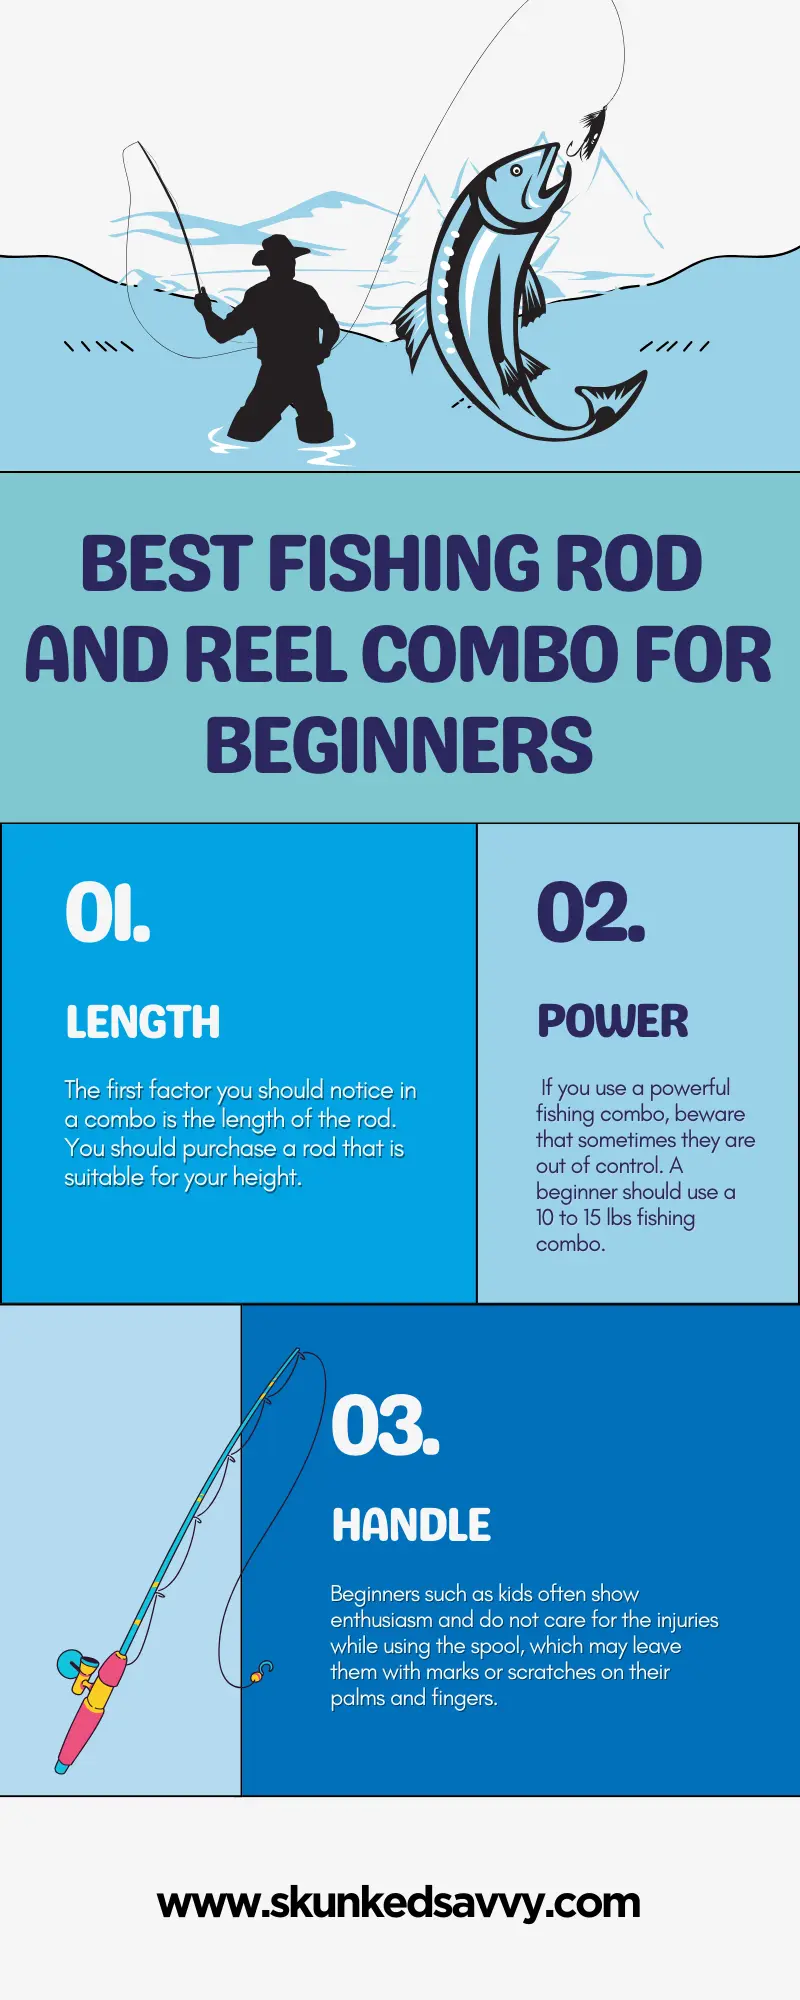 Buying Guide of Best Fishing Rod And Reel Combo for Beginners